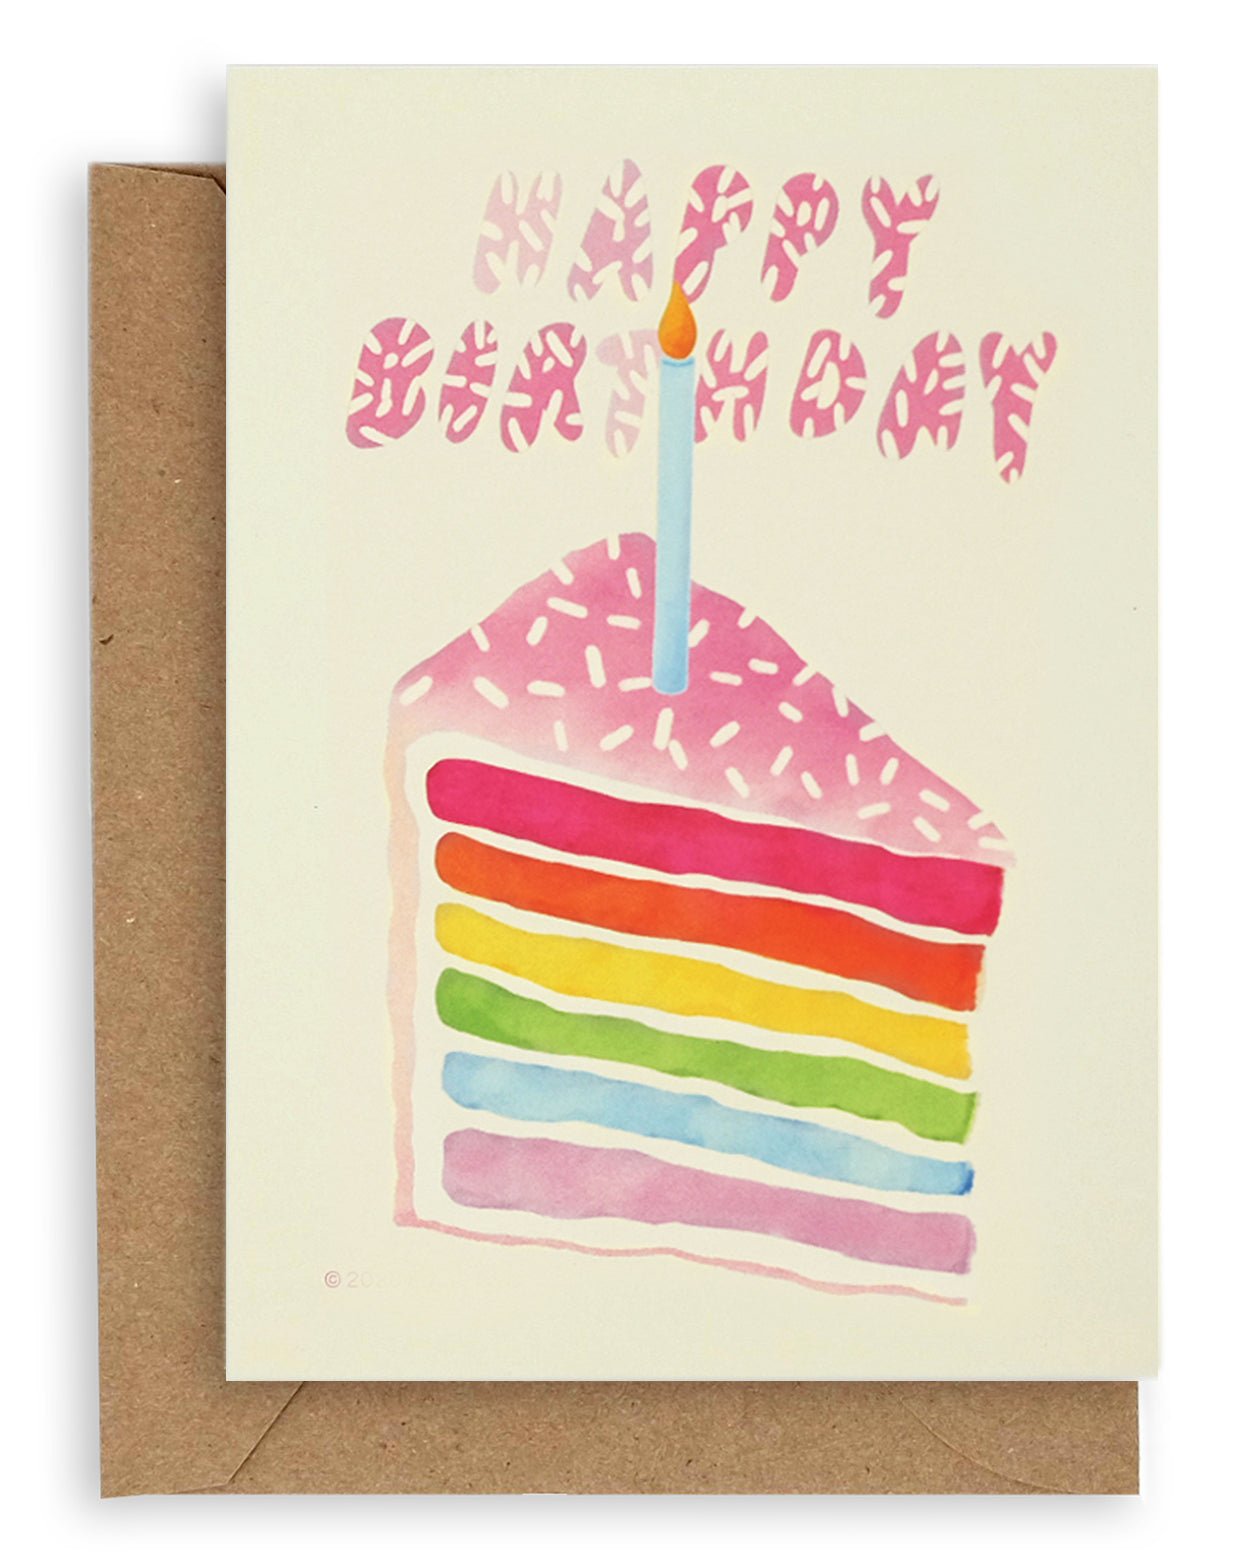 Cream colored card with soft pink text that reads &quot;Happy Birthday&quot; with white sprinkles on it. Below the text is a soft pink cake of the same shade with white sprinkles on top and rainbow colored layers inside of it with a kraft envelope under the card.